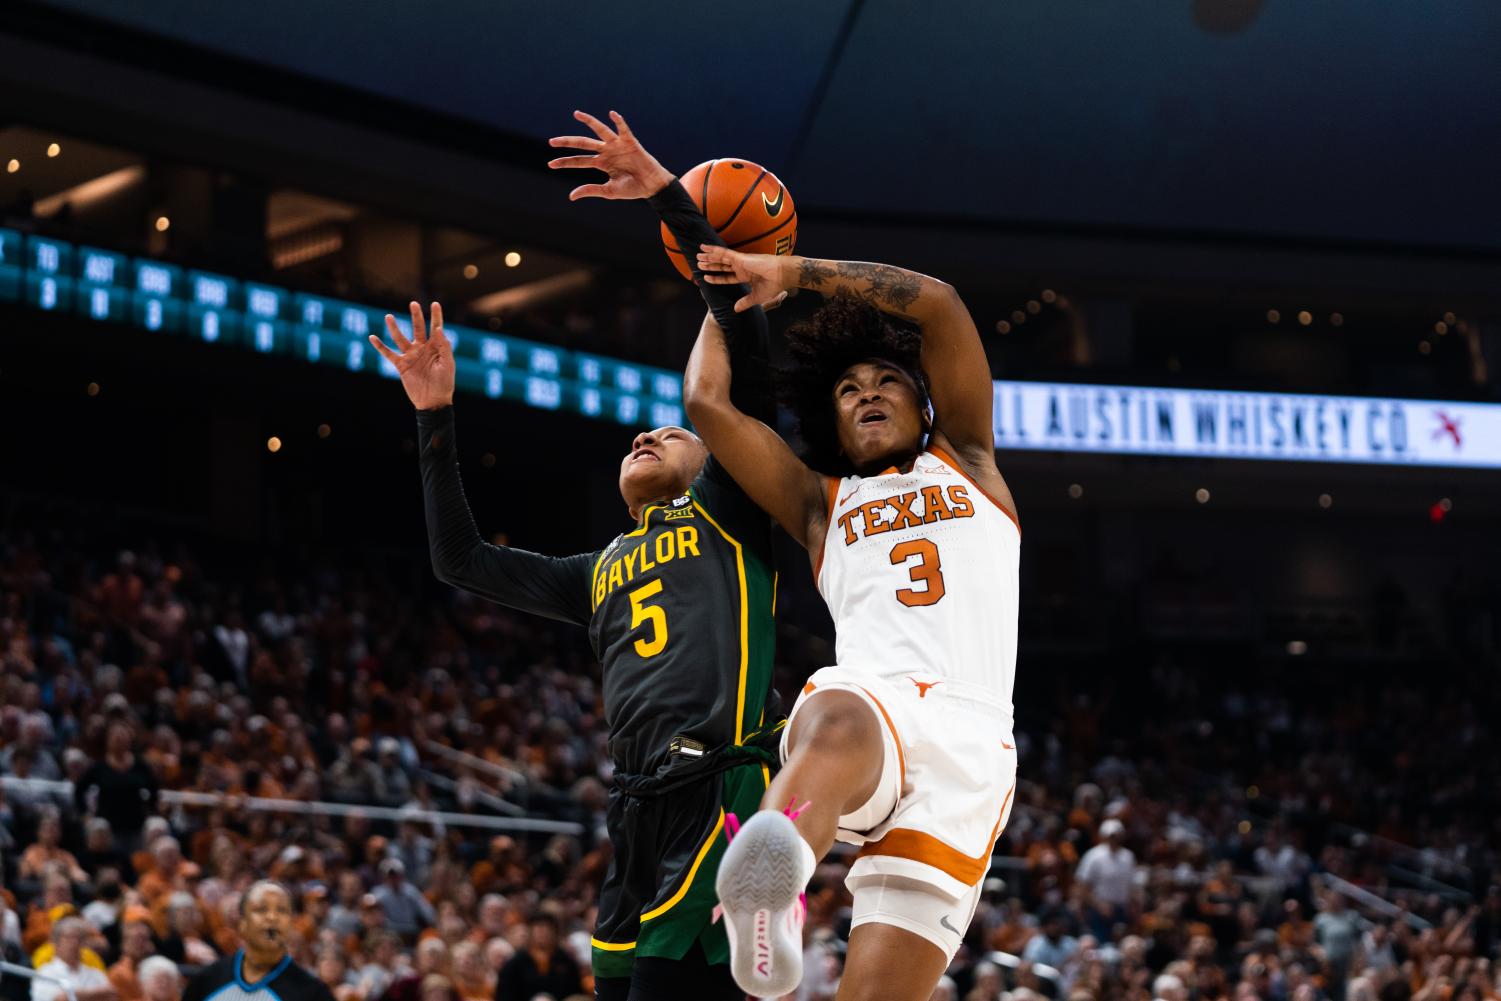 Texas women's basketball is seeking attendance numbers to match on-court  success – The Daily Texan